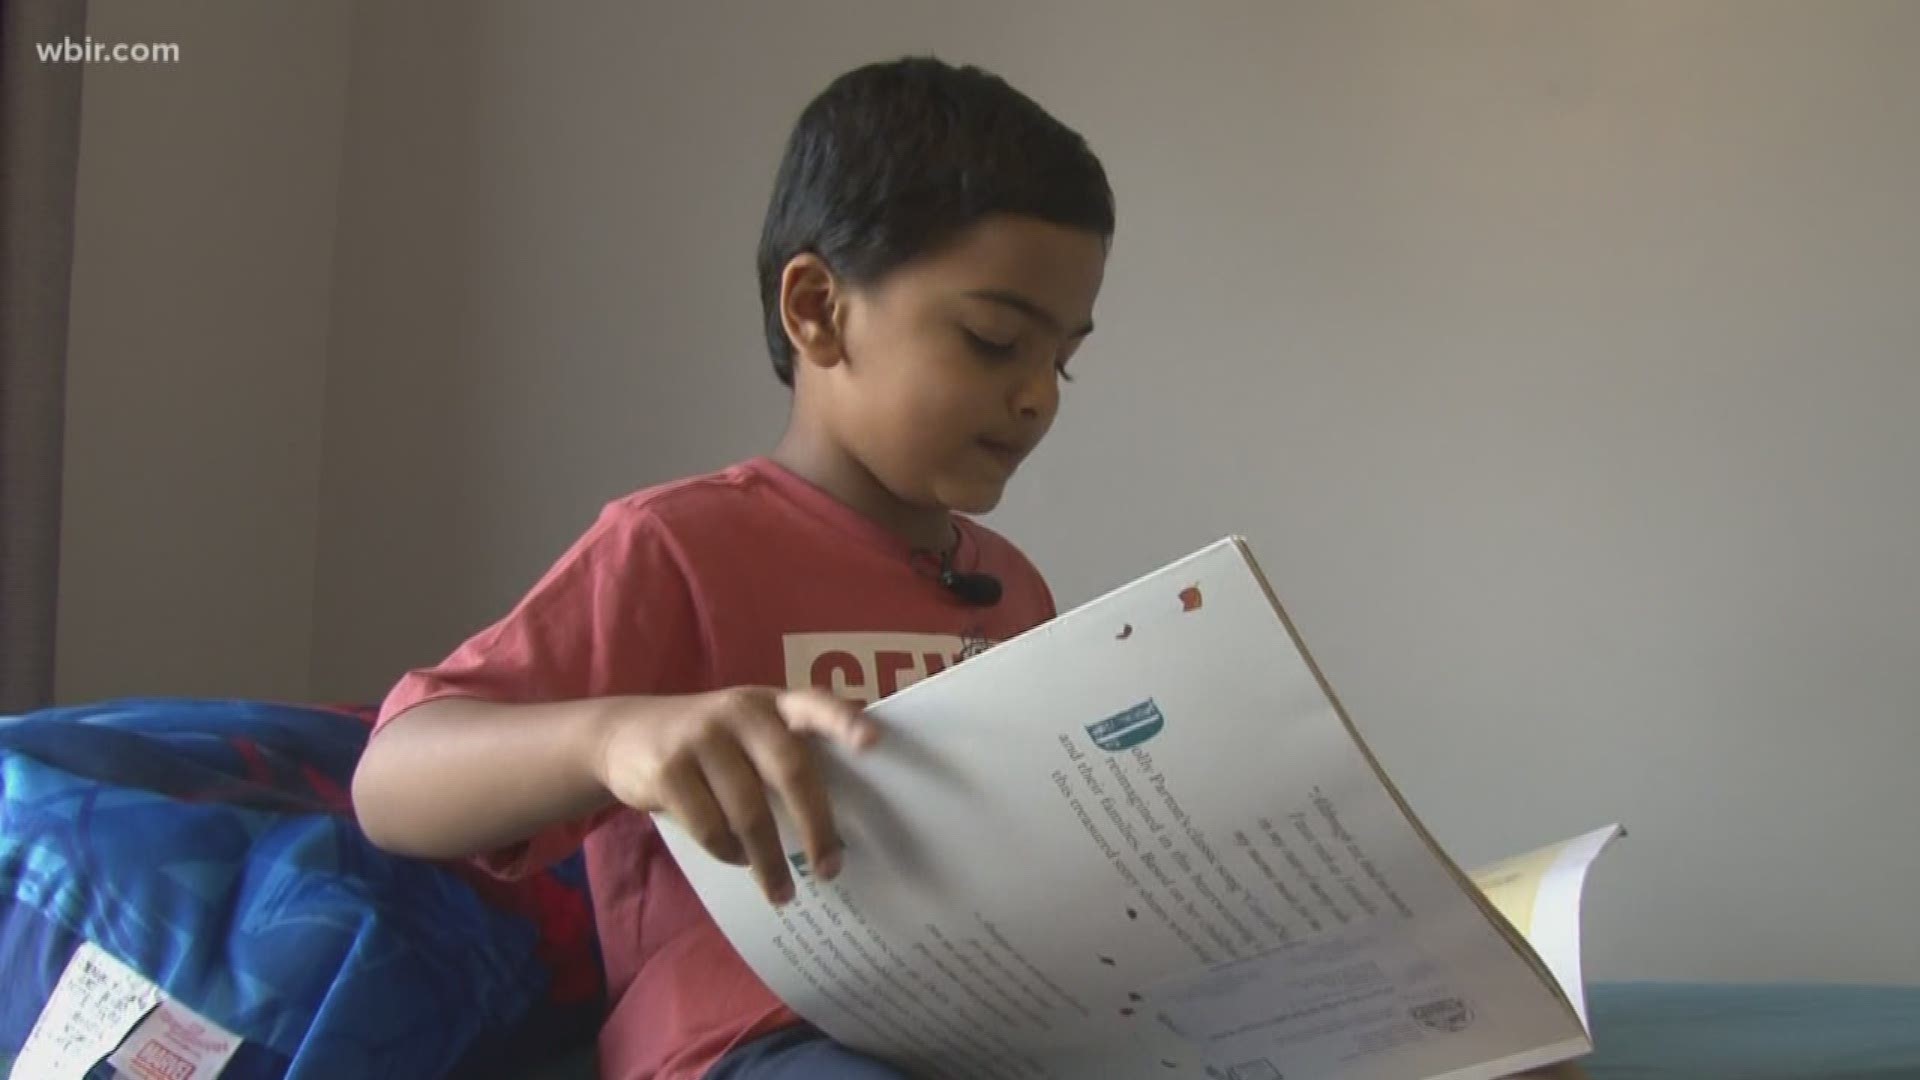 5-year-old Aayush doesn't even realize he took a gifted test at UT, but his parents knew they had to figure out just how smart their son was.